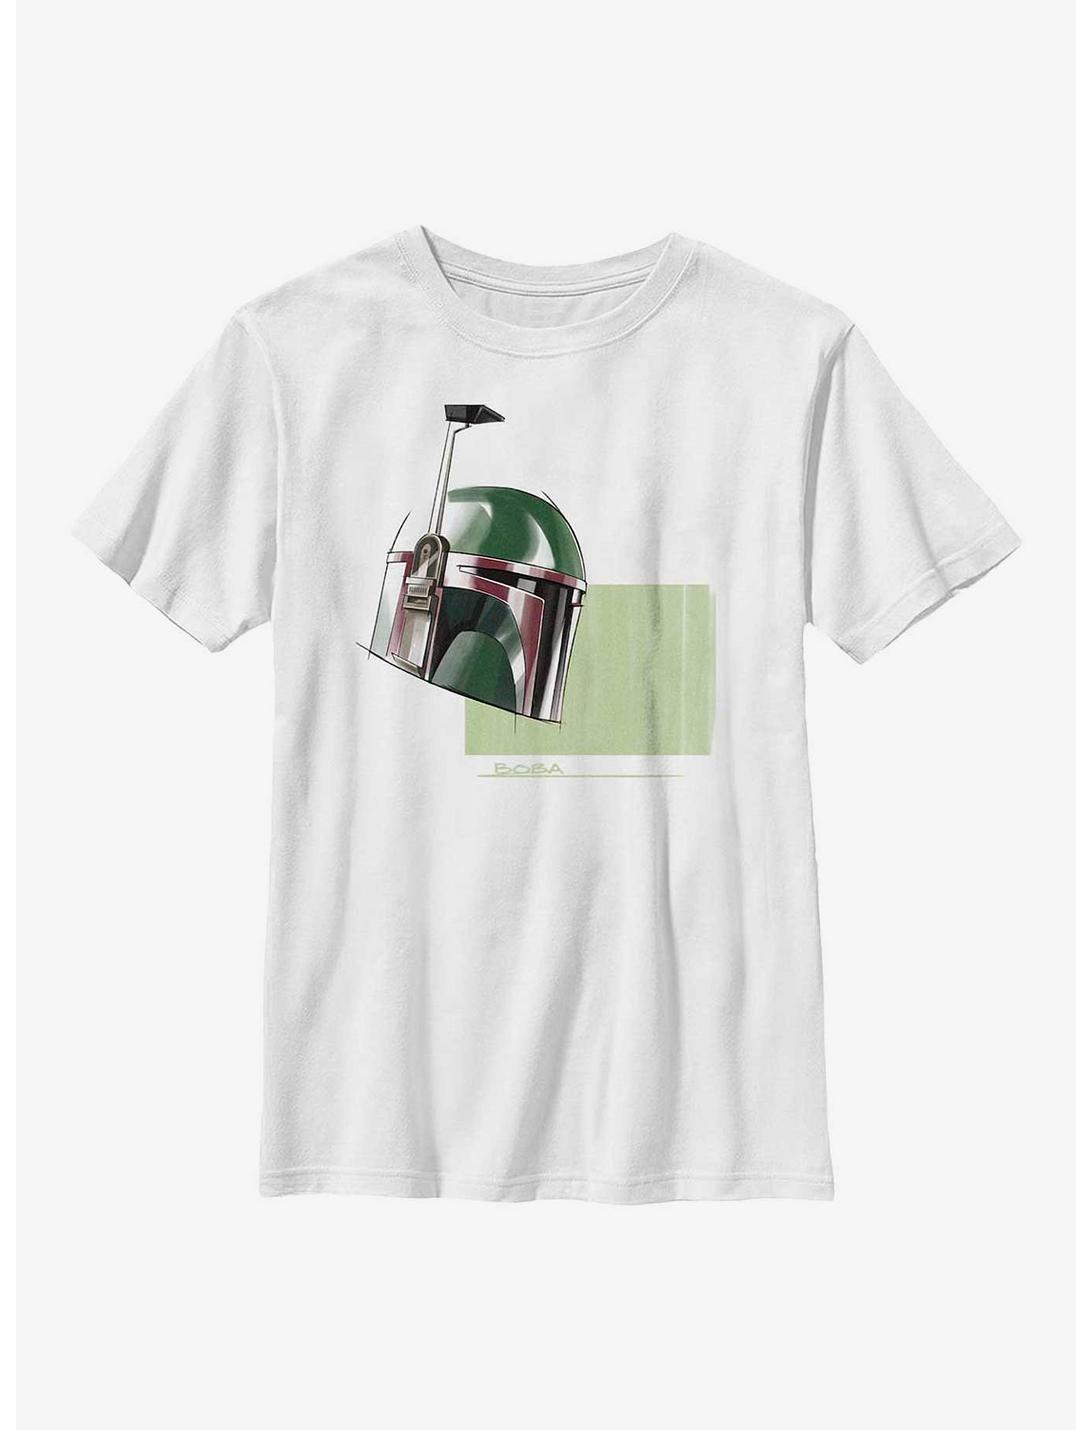 Star Wars: The Book Of Boba Fett Helmet Drawing Youth T-Shirt, WHITE, hi-res